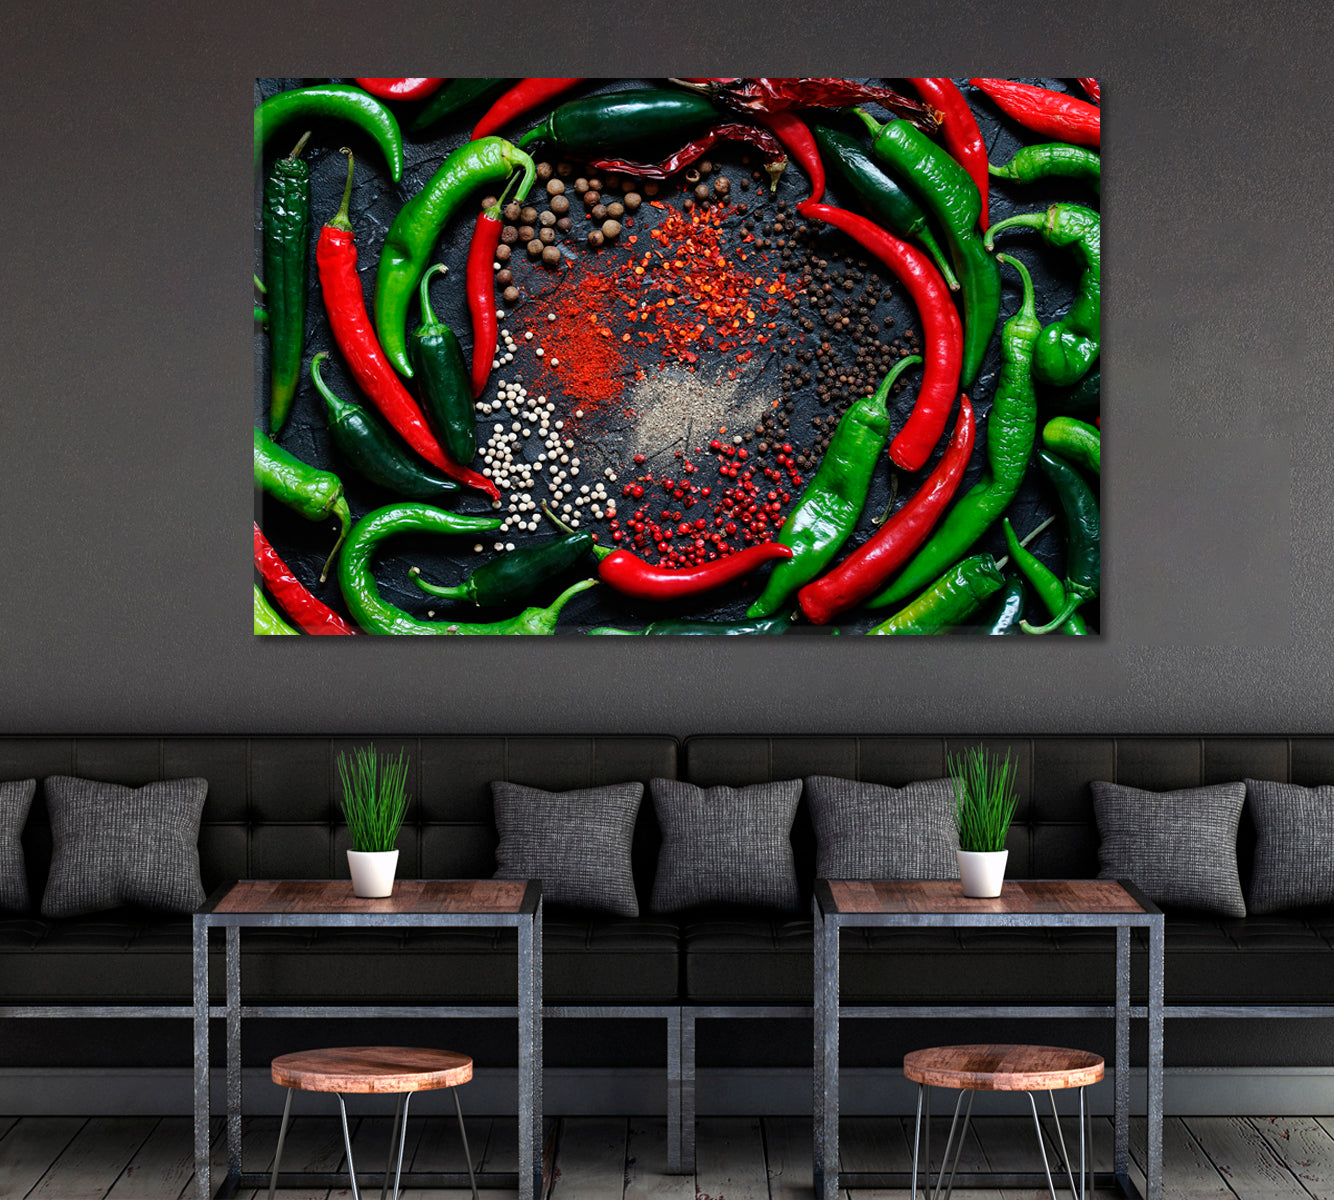 Chili Peppers Canvas Print ArtLexy 1 Panel 24"x16" inches 